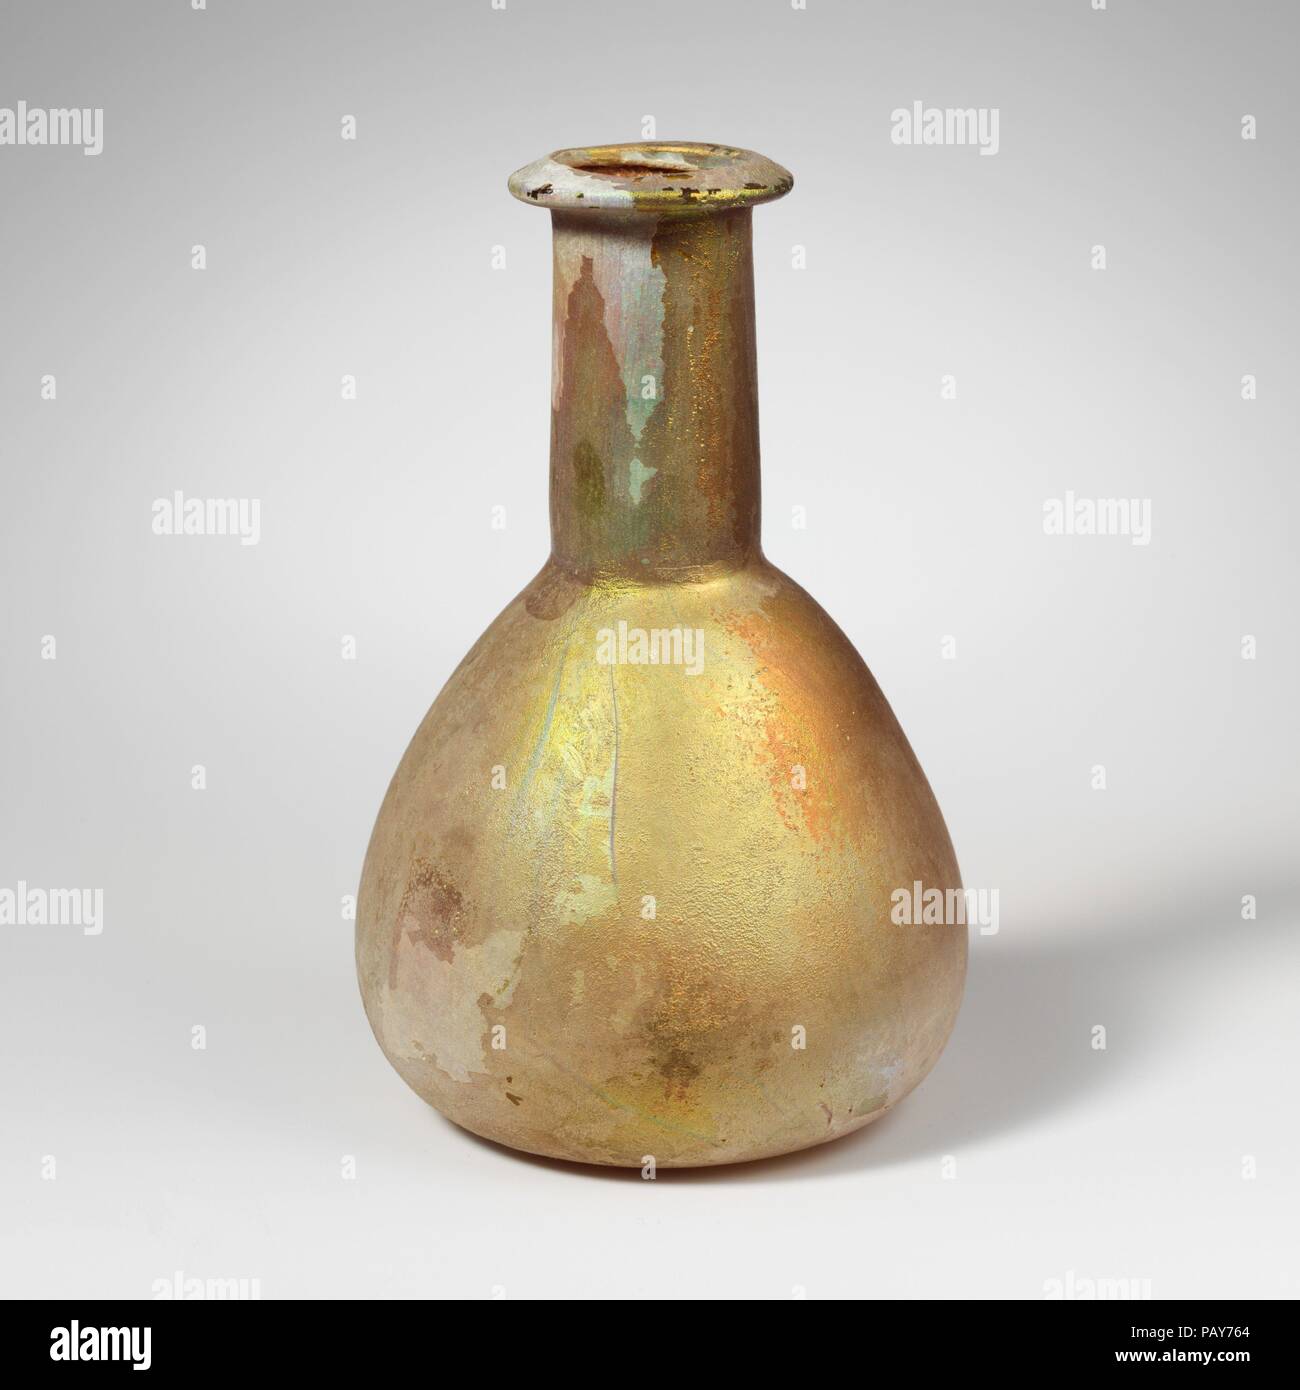 Glass perfume bottle. Culture: Roman. Dimensions: 5 3/16 in. (13.1 cm)  Other: 3 5/16 in. (8.4 cm)  Diam. of rim: 1 1/2 in. (3.8 cm). Date: 1st-2nd century A.D..  Translucent pale blue green.  Rim folded out, over, and in, with beveled upper surface and rounded lip around mouth; cylindrical neck, expanding downward and slightly tooled in around base; broad, piriform body; convex bottom, slightly flattened at center. Fairly thick and heavy glass.  Intact; many pinprick bubbles; deeply pitted and weathered, with brilliant iridescence on most of surface. Museum: Metropolitan Museum of Art, New Yo Stock Photo